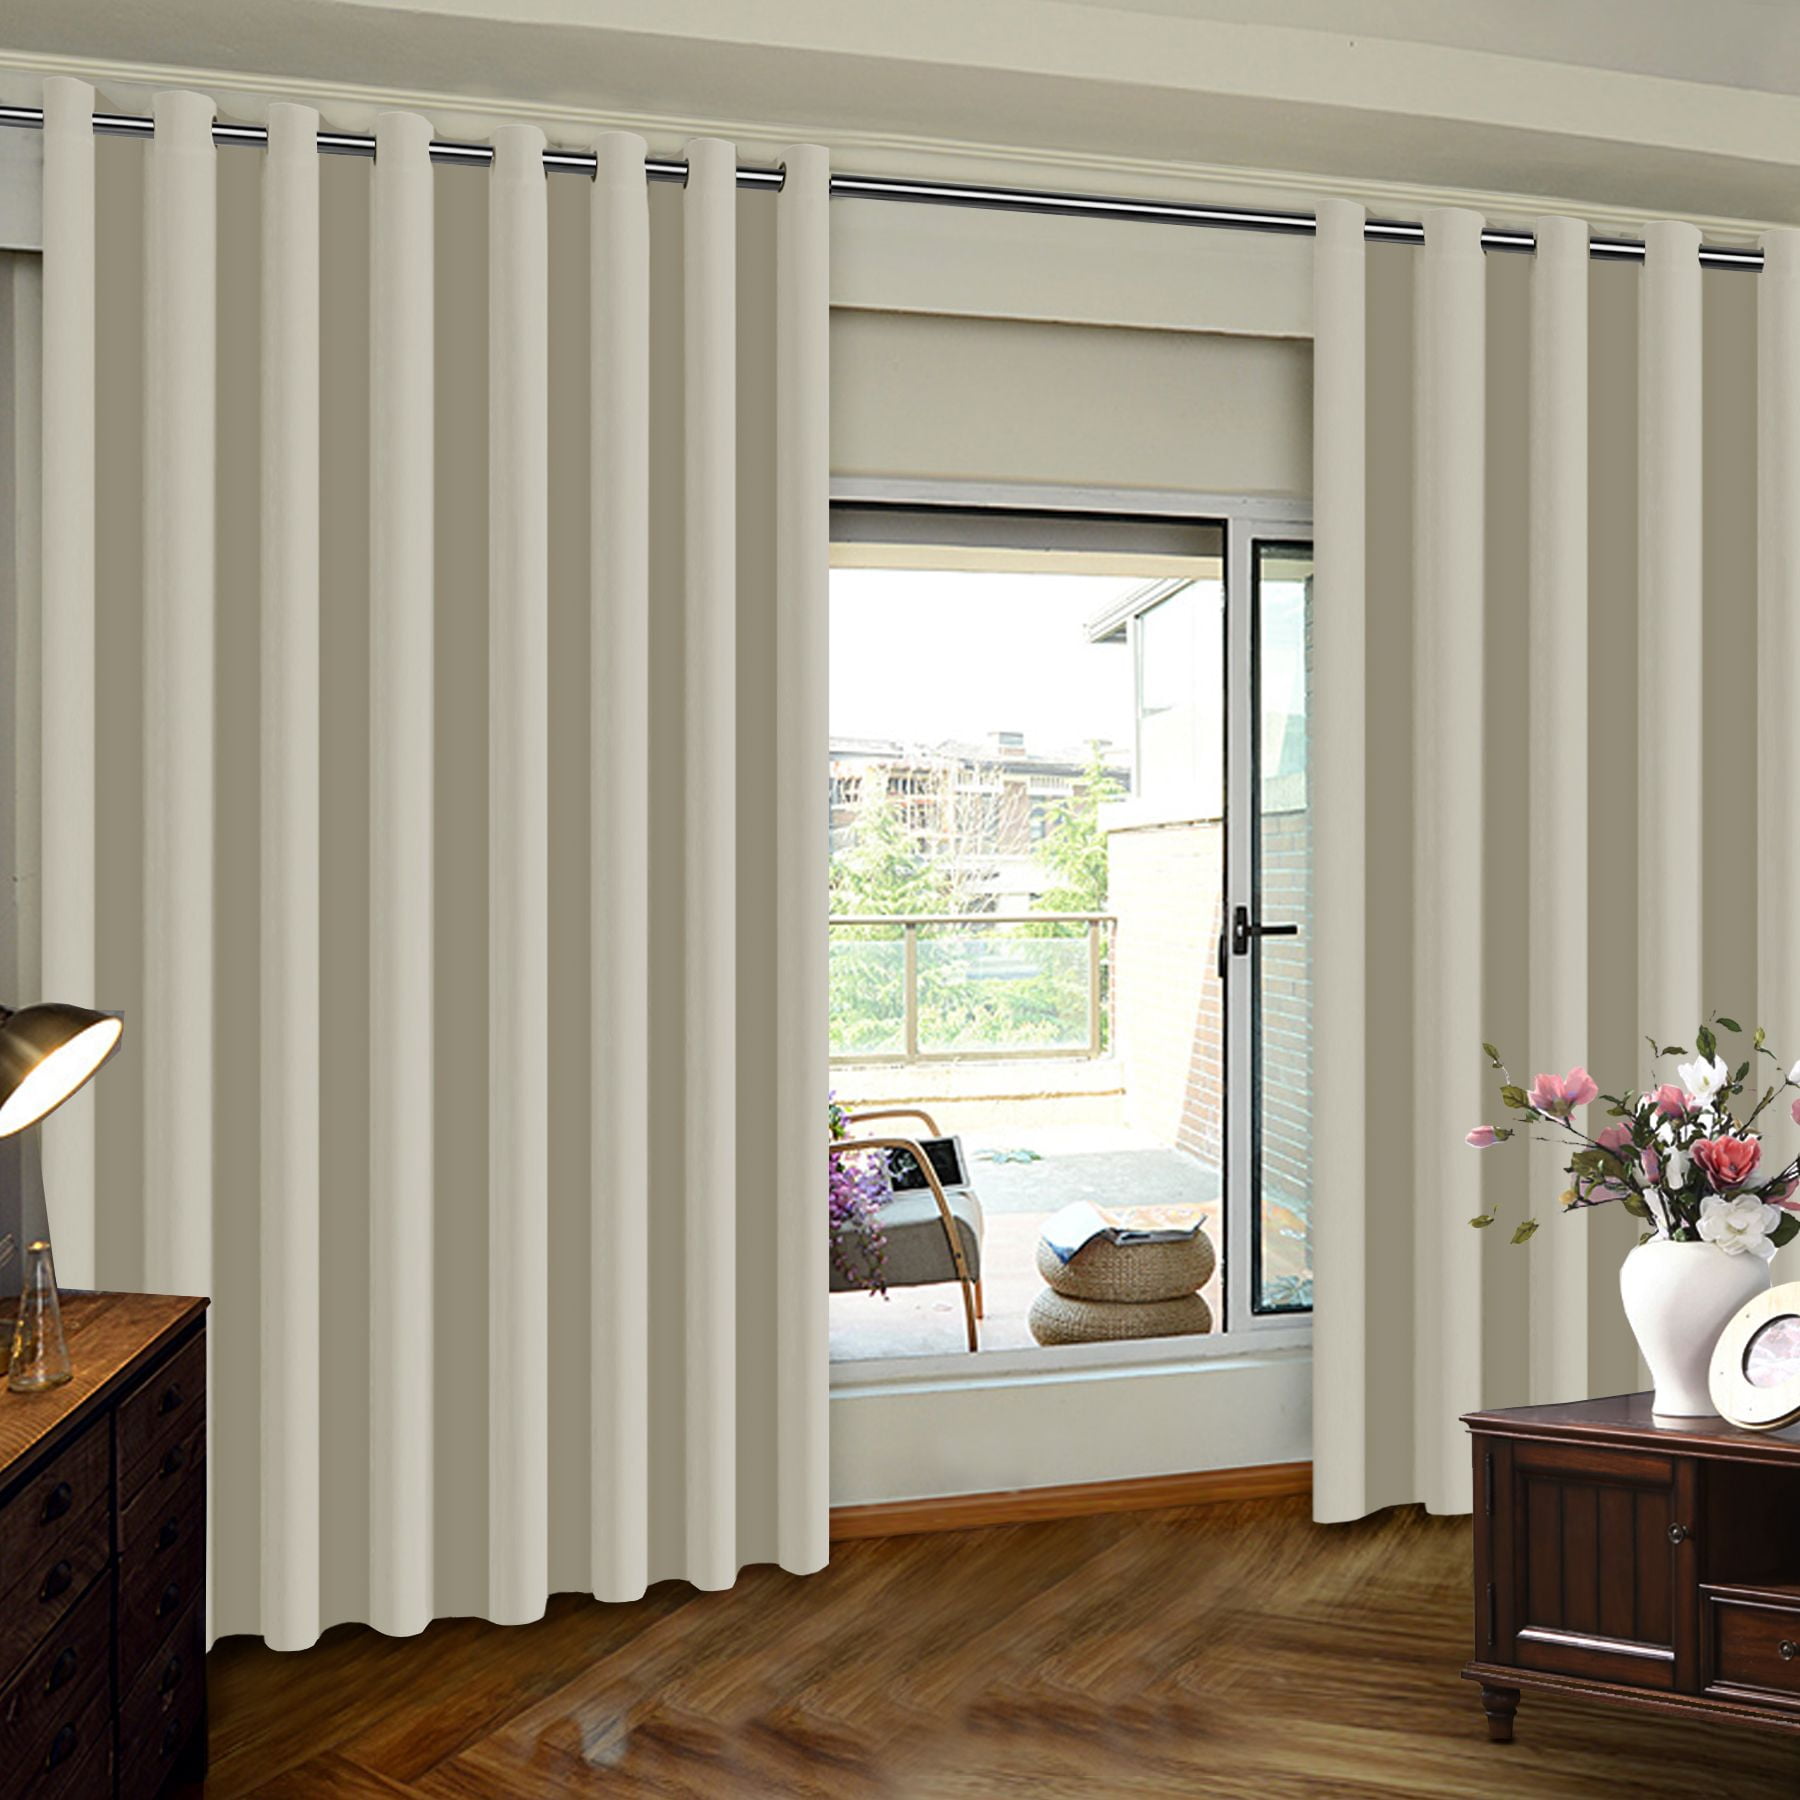 Wide Window Curtains Rooms hgtv simples cortina grommet foter